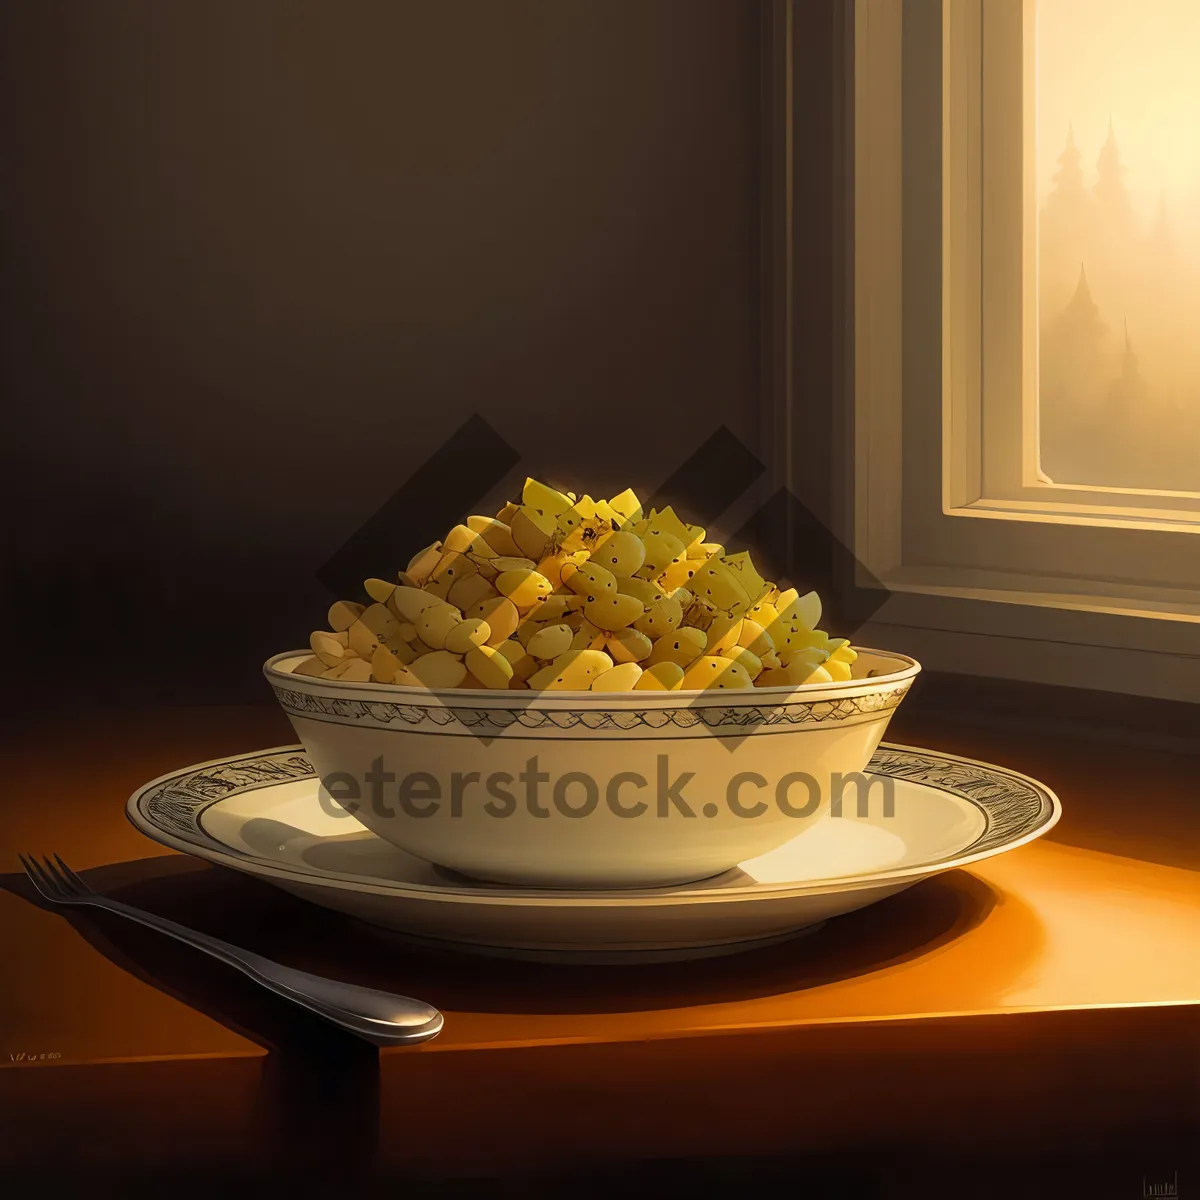 Picture of Delicious Corn Popcorn on a Plate